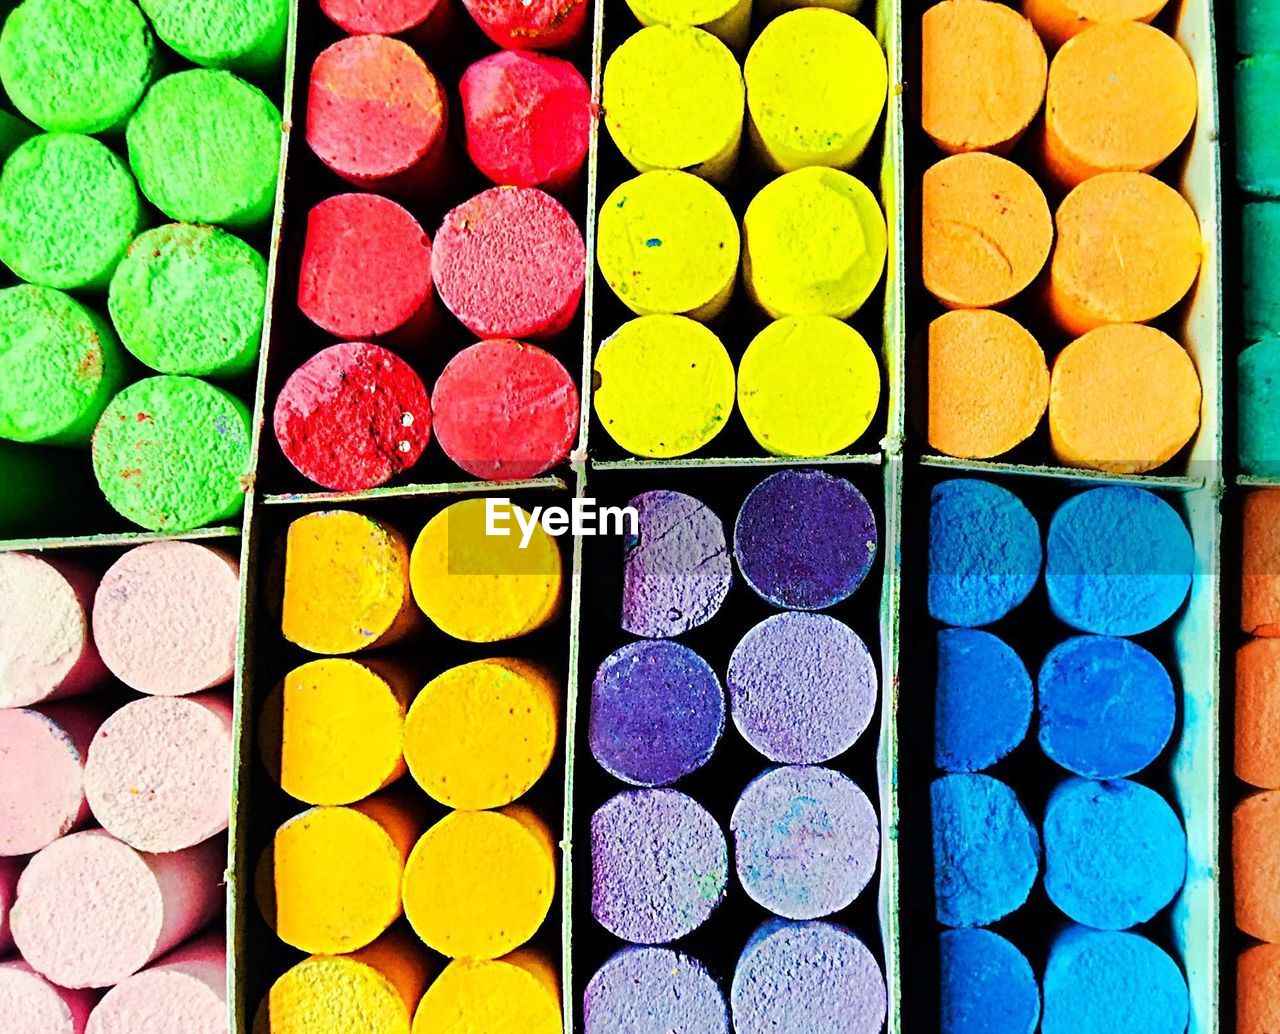 Chalk collection at market stall